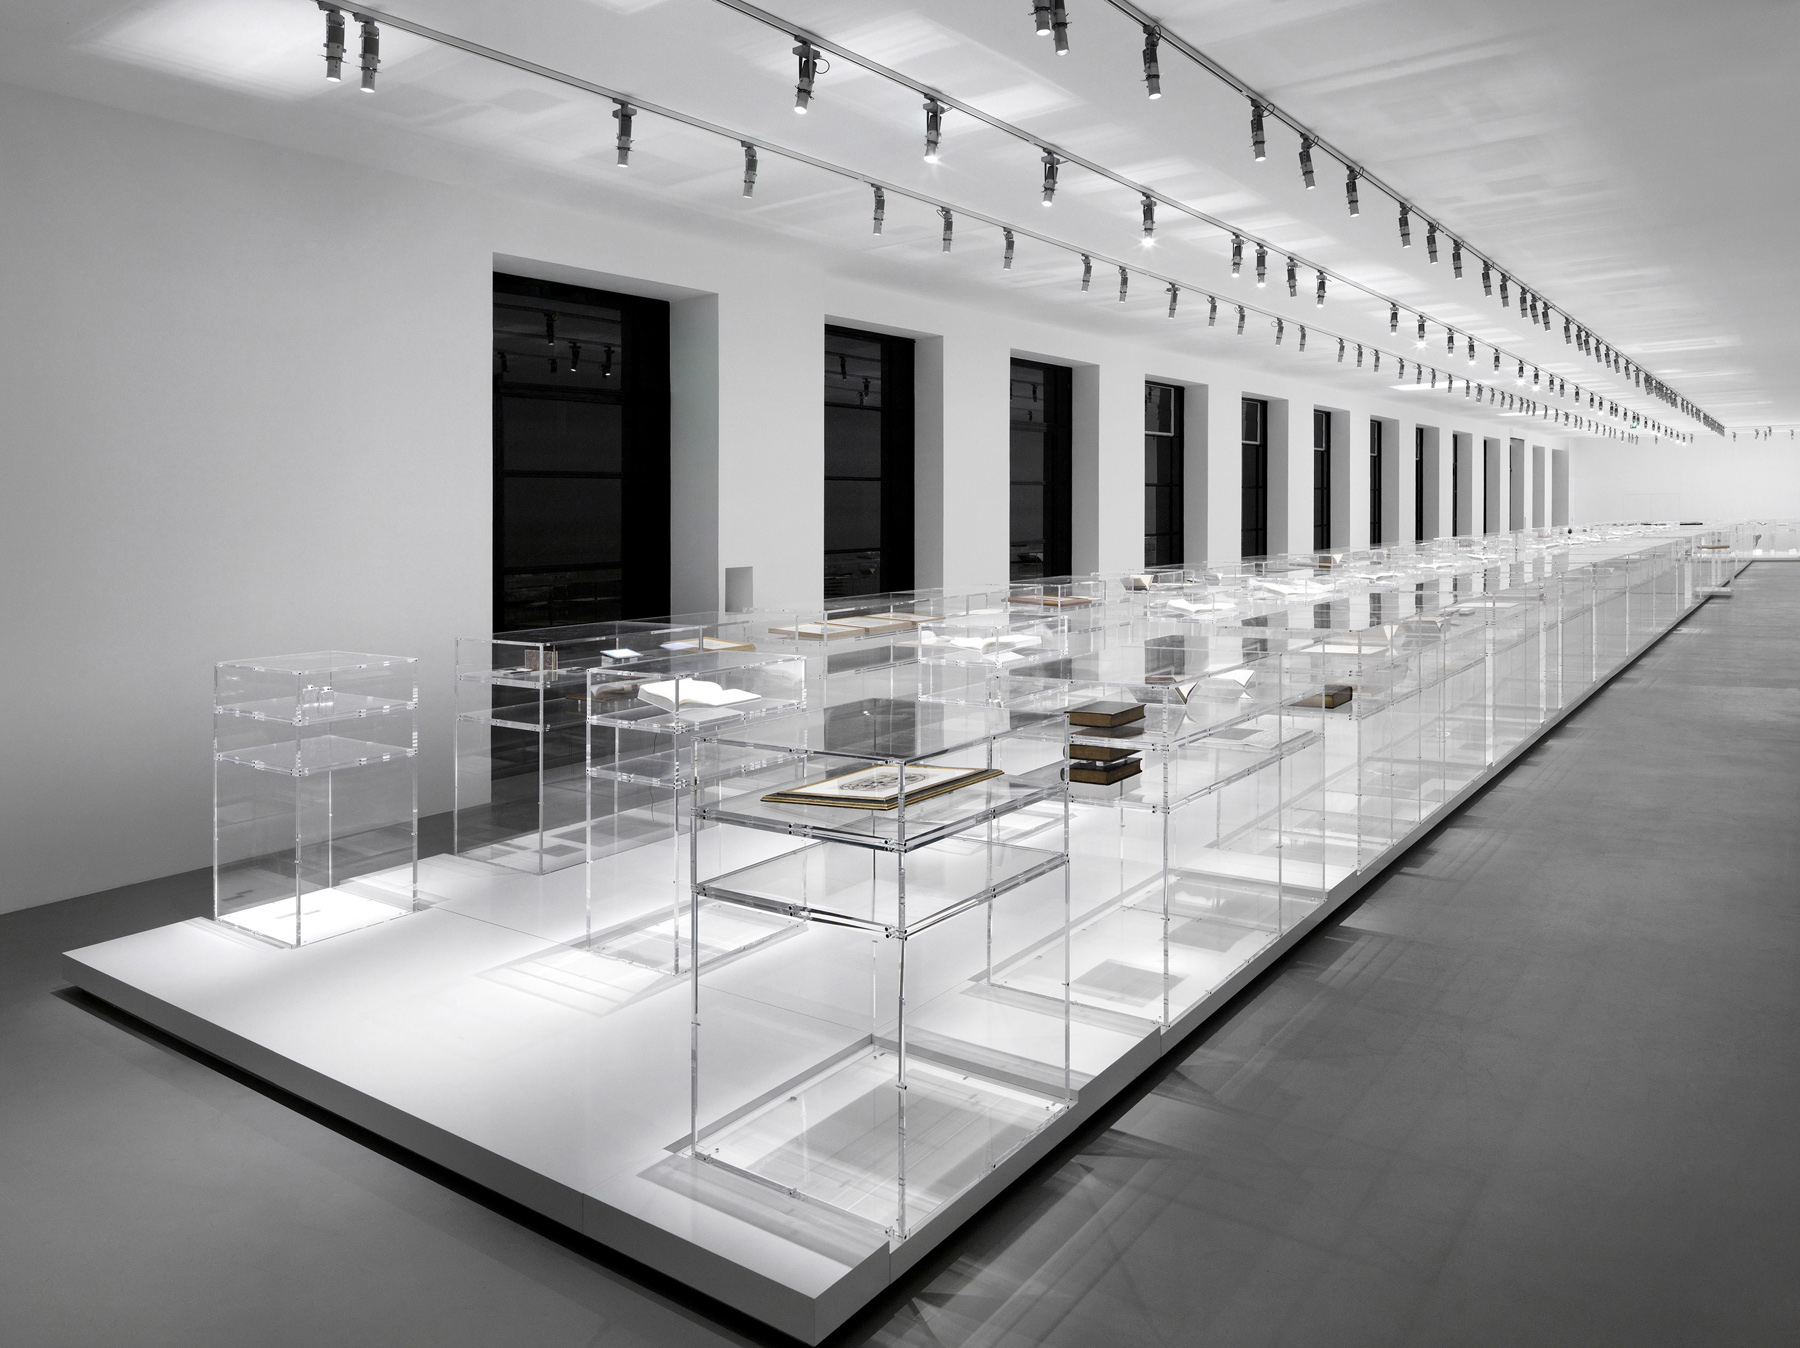 Chanel N°5 Culture  Jonathan Leijonhufvud Architectural Photography